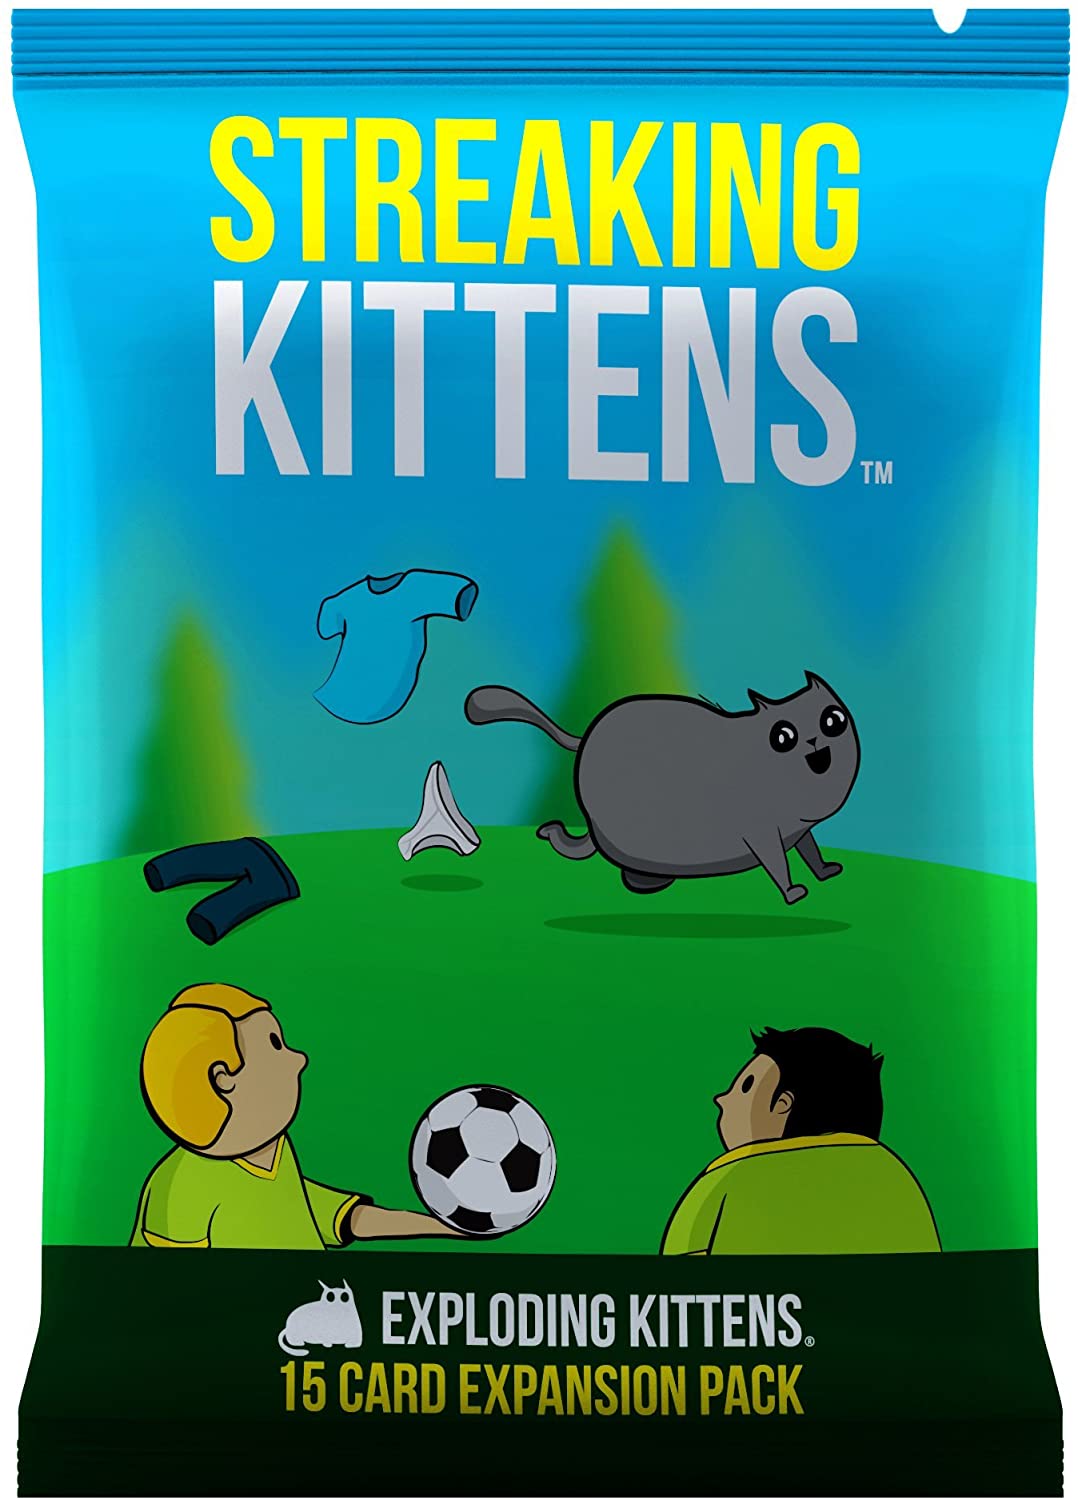 Streaking Kittens: Exploding Kittens Card Game Expansion Pack - BigBoi Cards